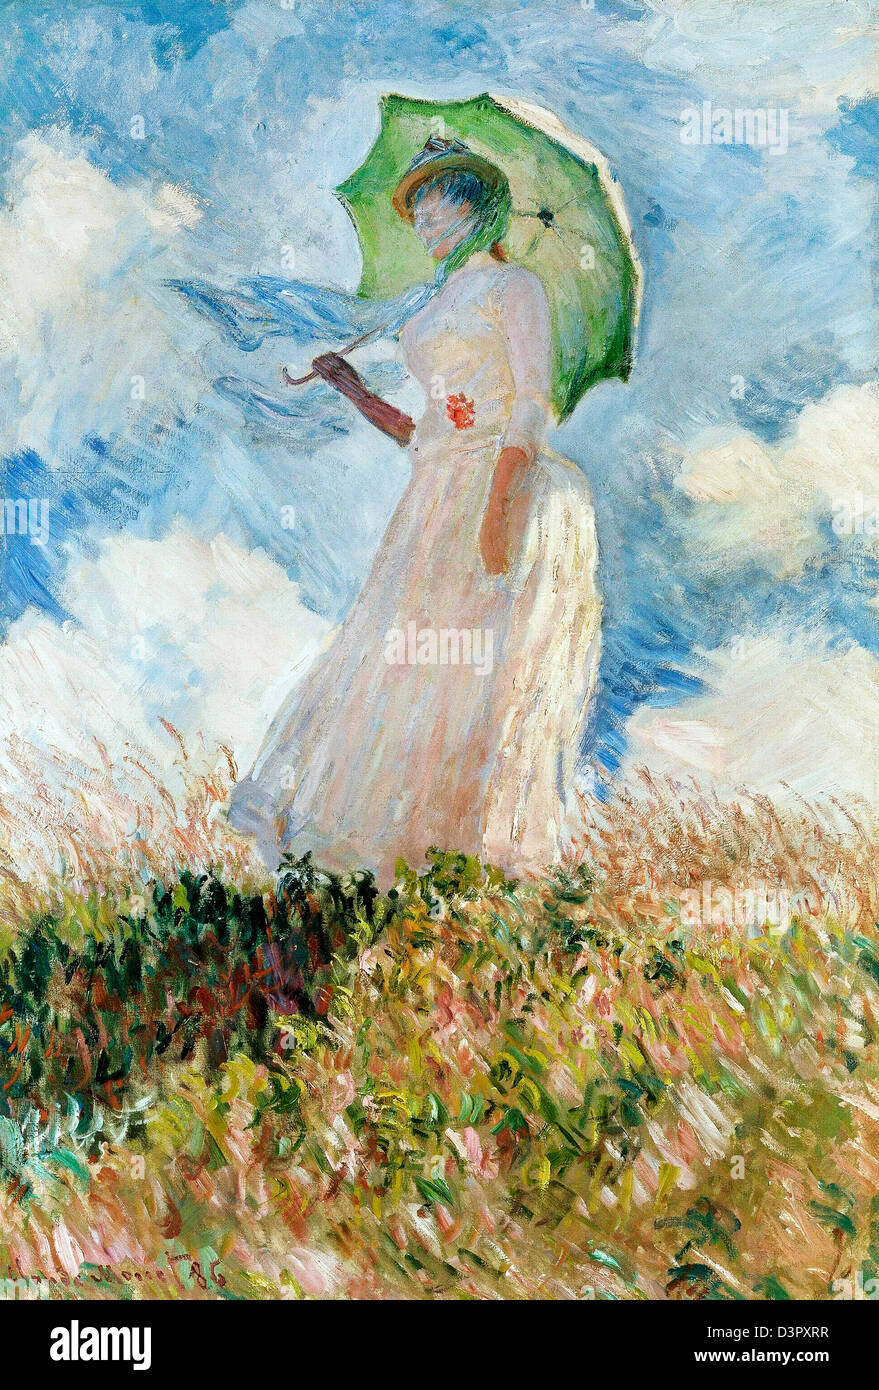 Claude Monet, Study of a Figure Outdoors: Woman with a Parasol, facing left,  1886 Oil on canvas. Musée d'Orsay, Paris, France Stock Photo - Alamy